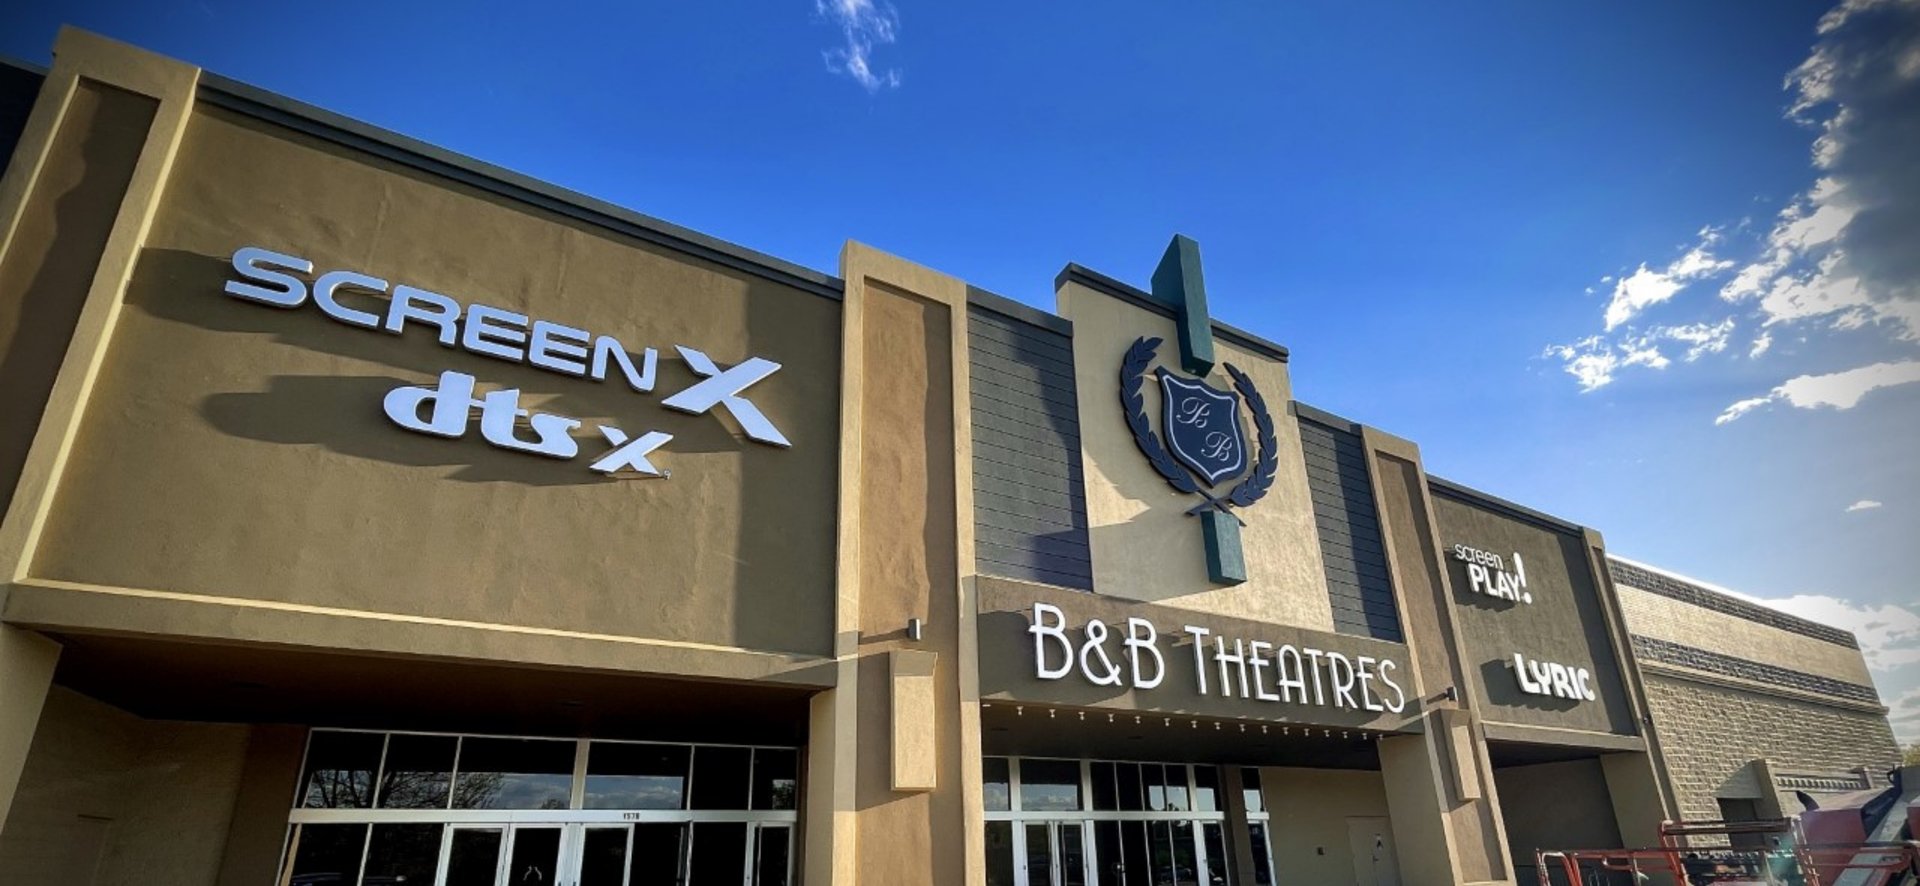 exterior of theatre showing B&B Theaters sign